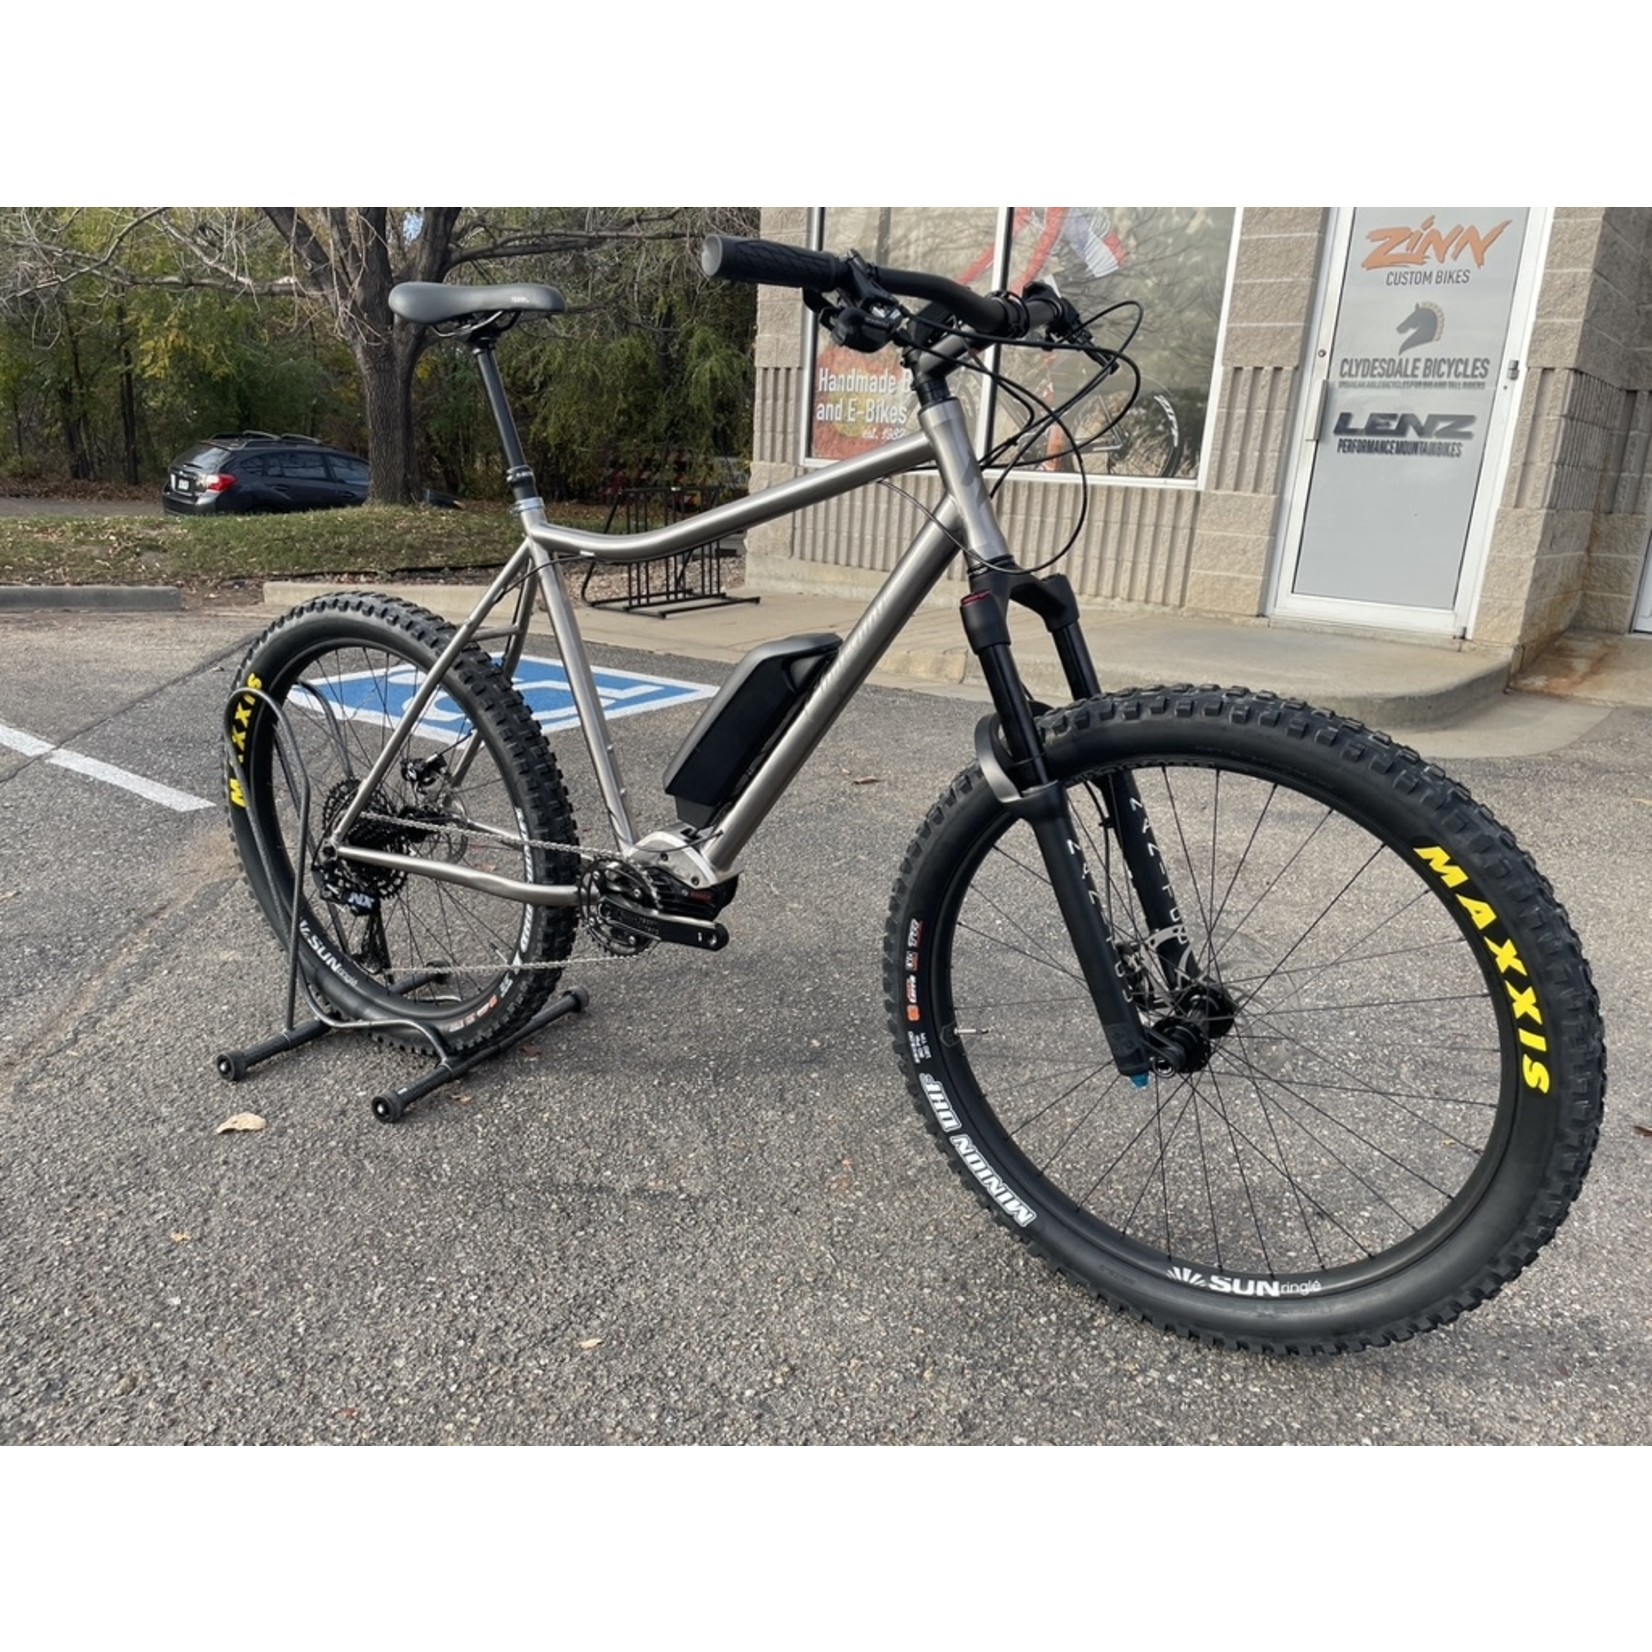 Clydesdale Clydesdale Spur - Titanium Electric Fat Bike/29er